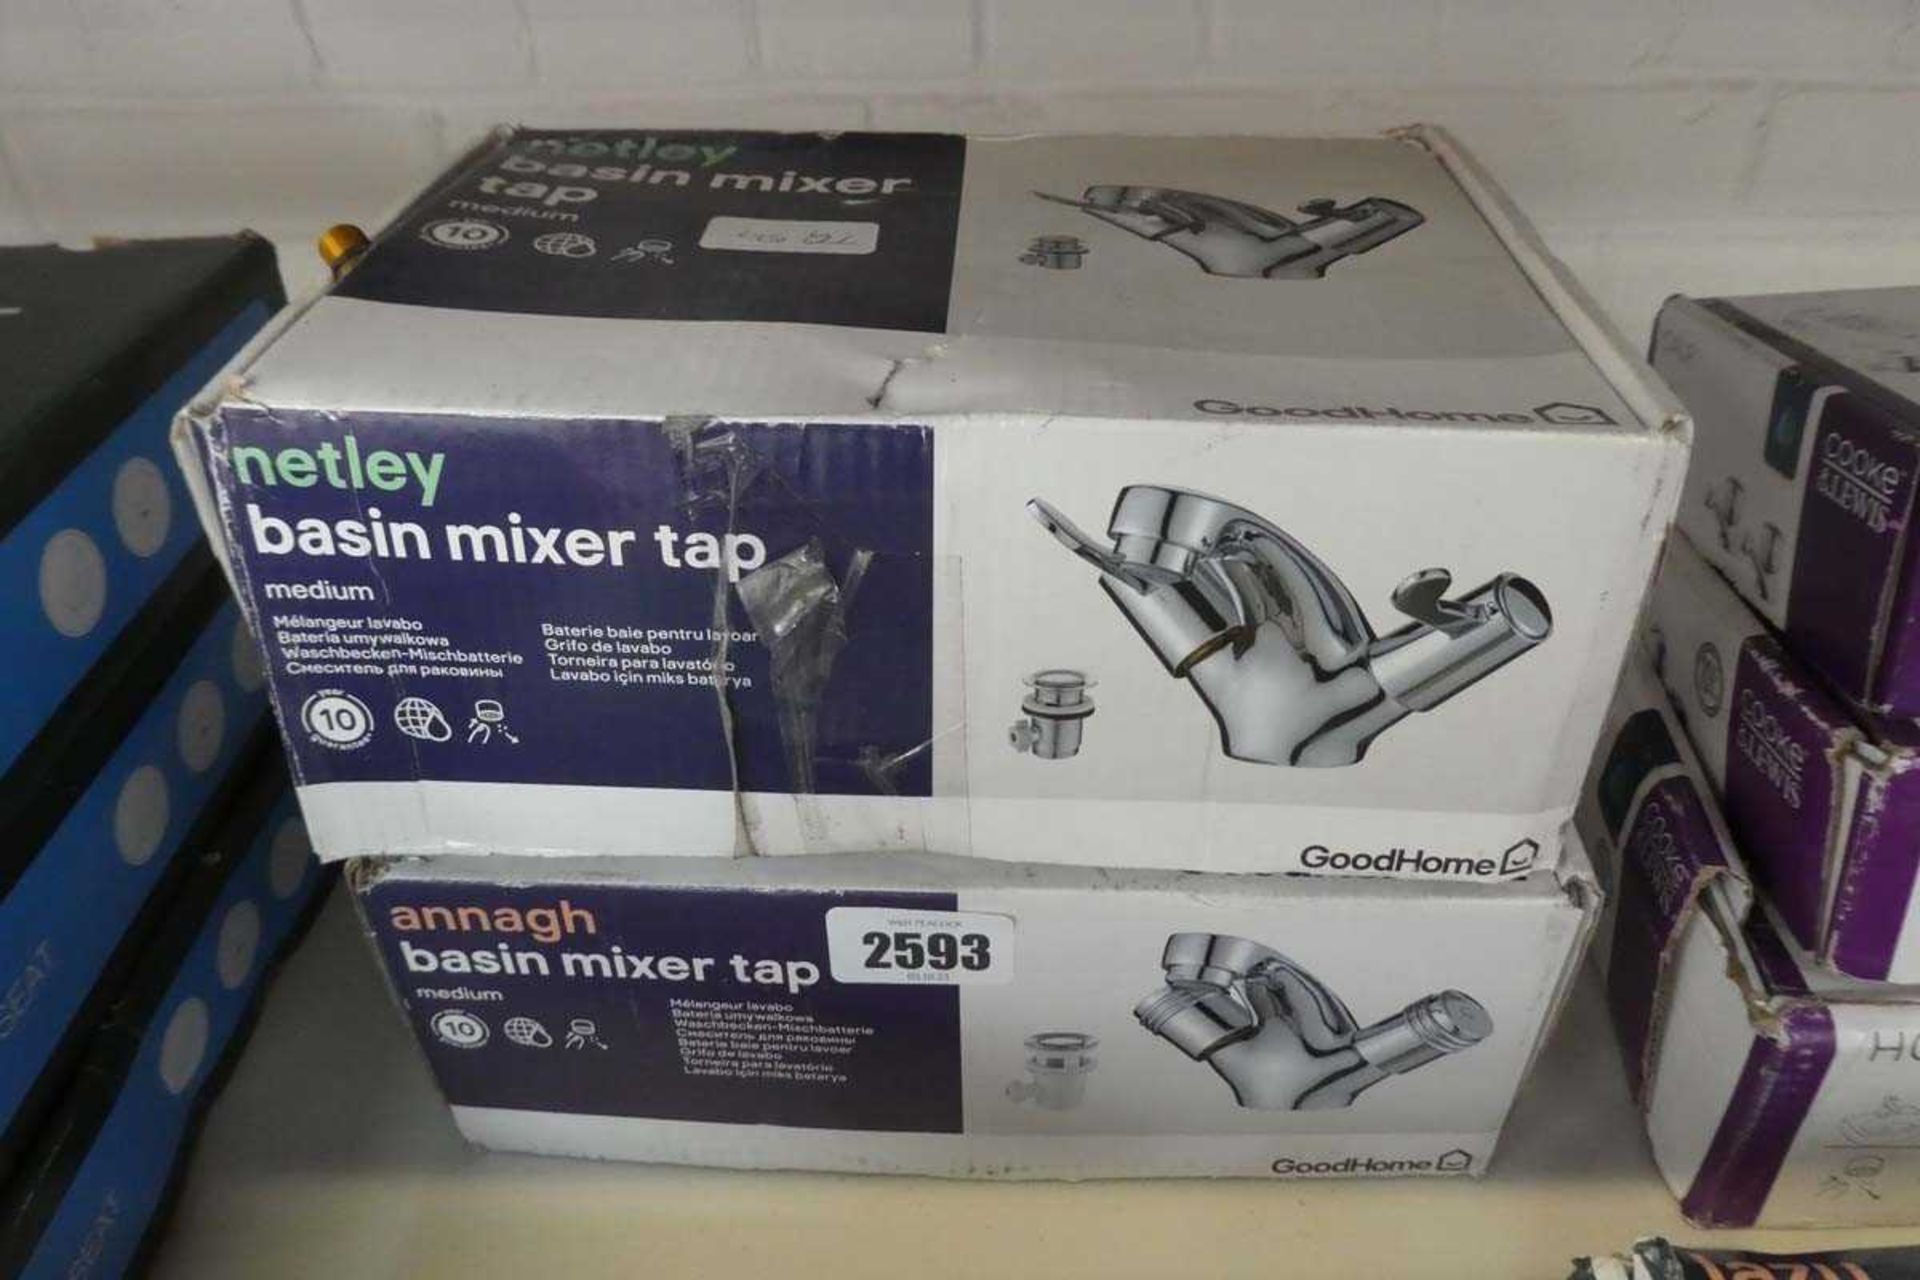 2 boxed chrome basin mixer taps, made by Good Home, Series Netley and Annagh